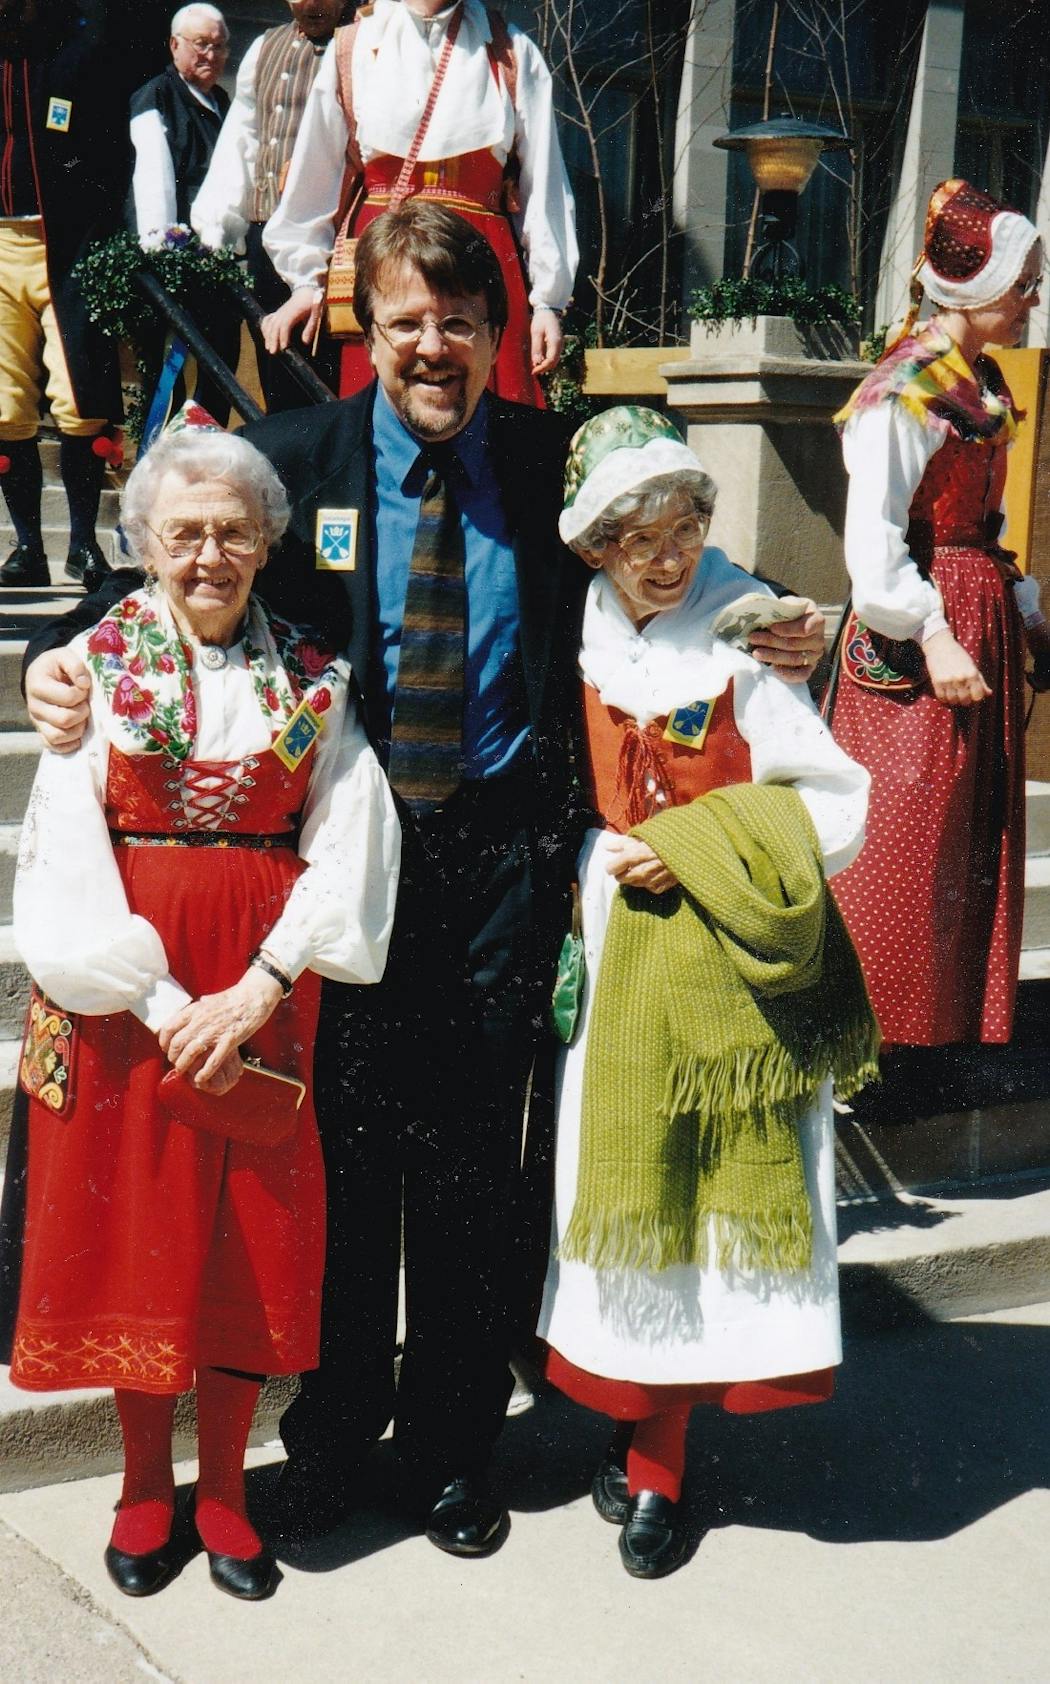 Bruce Karstadt posed with guests at a 1998 celebration at the American Swedish Institute.